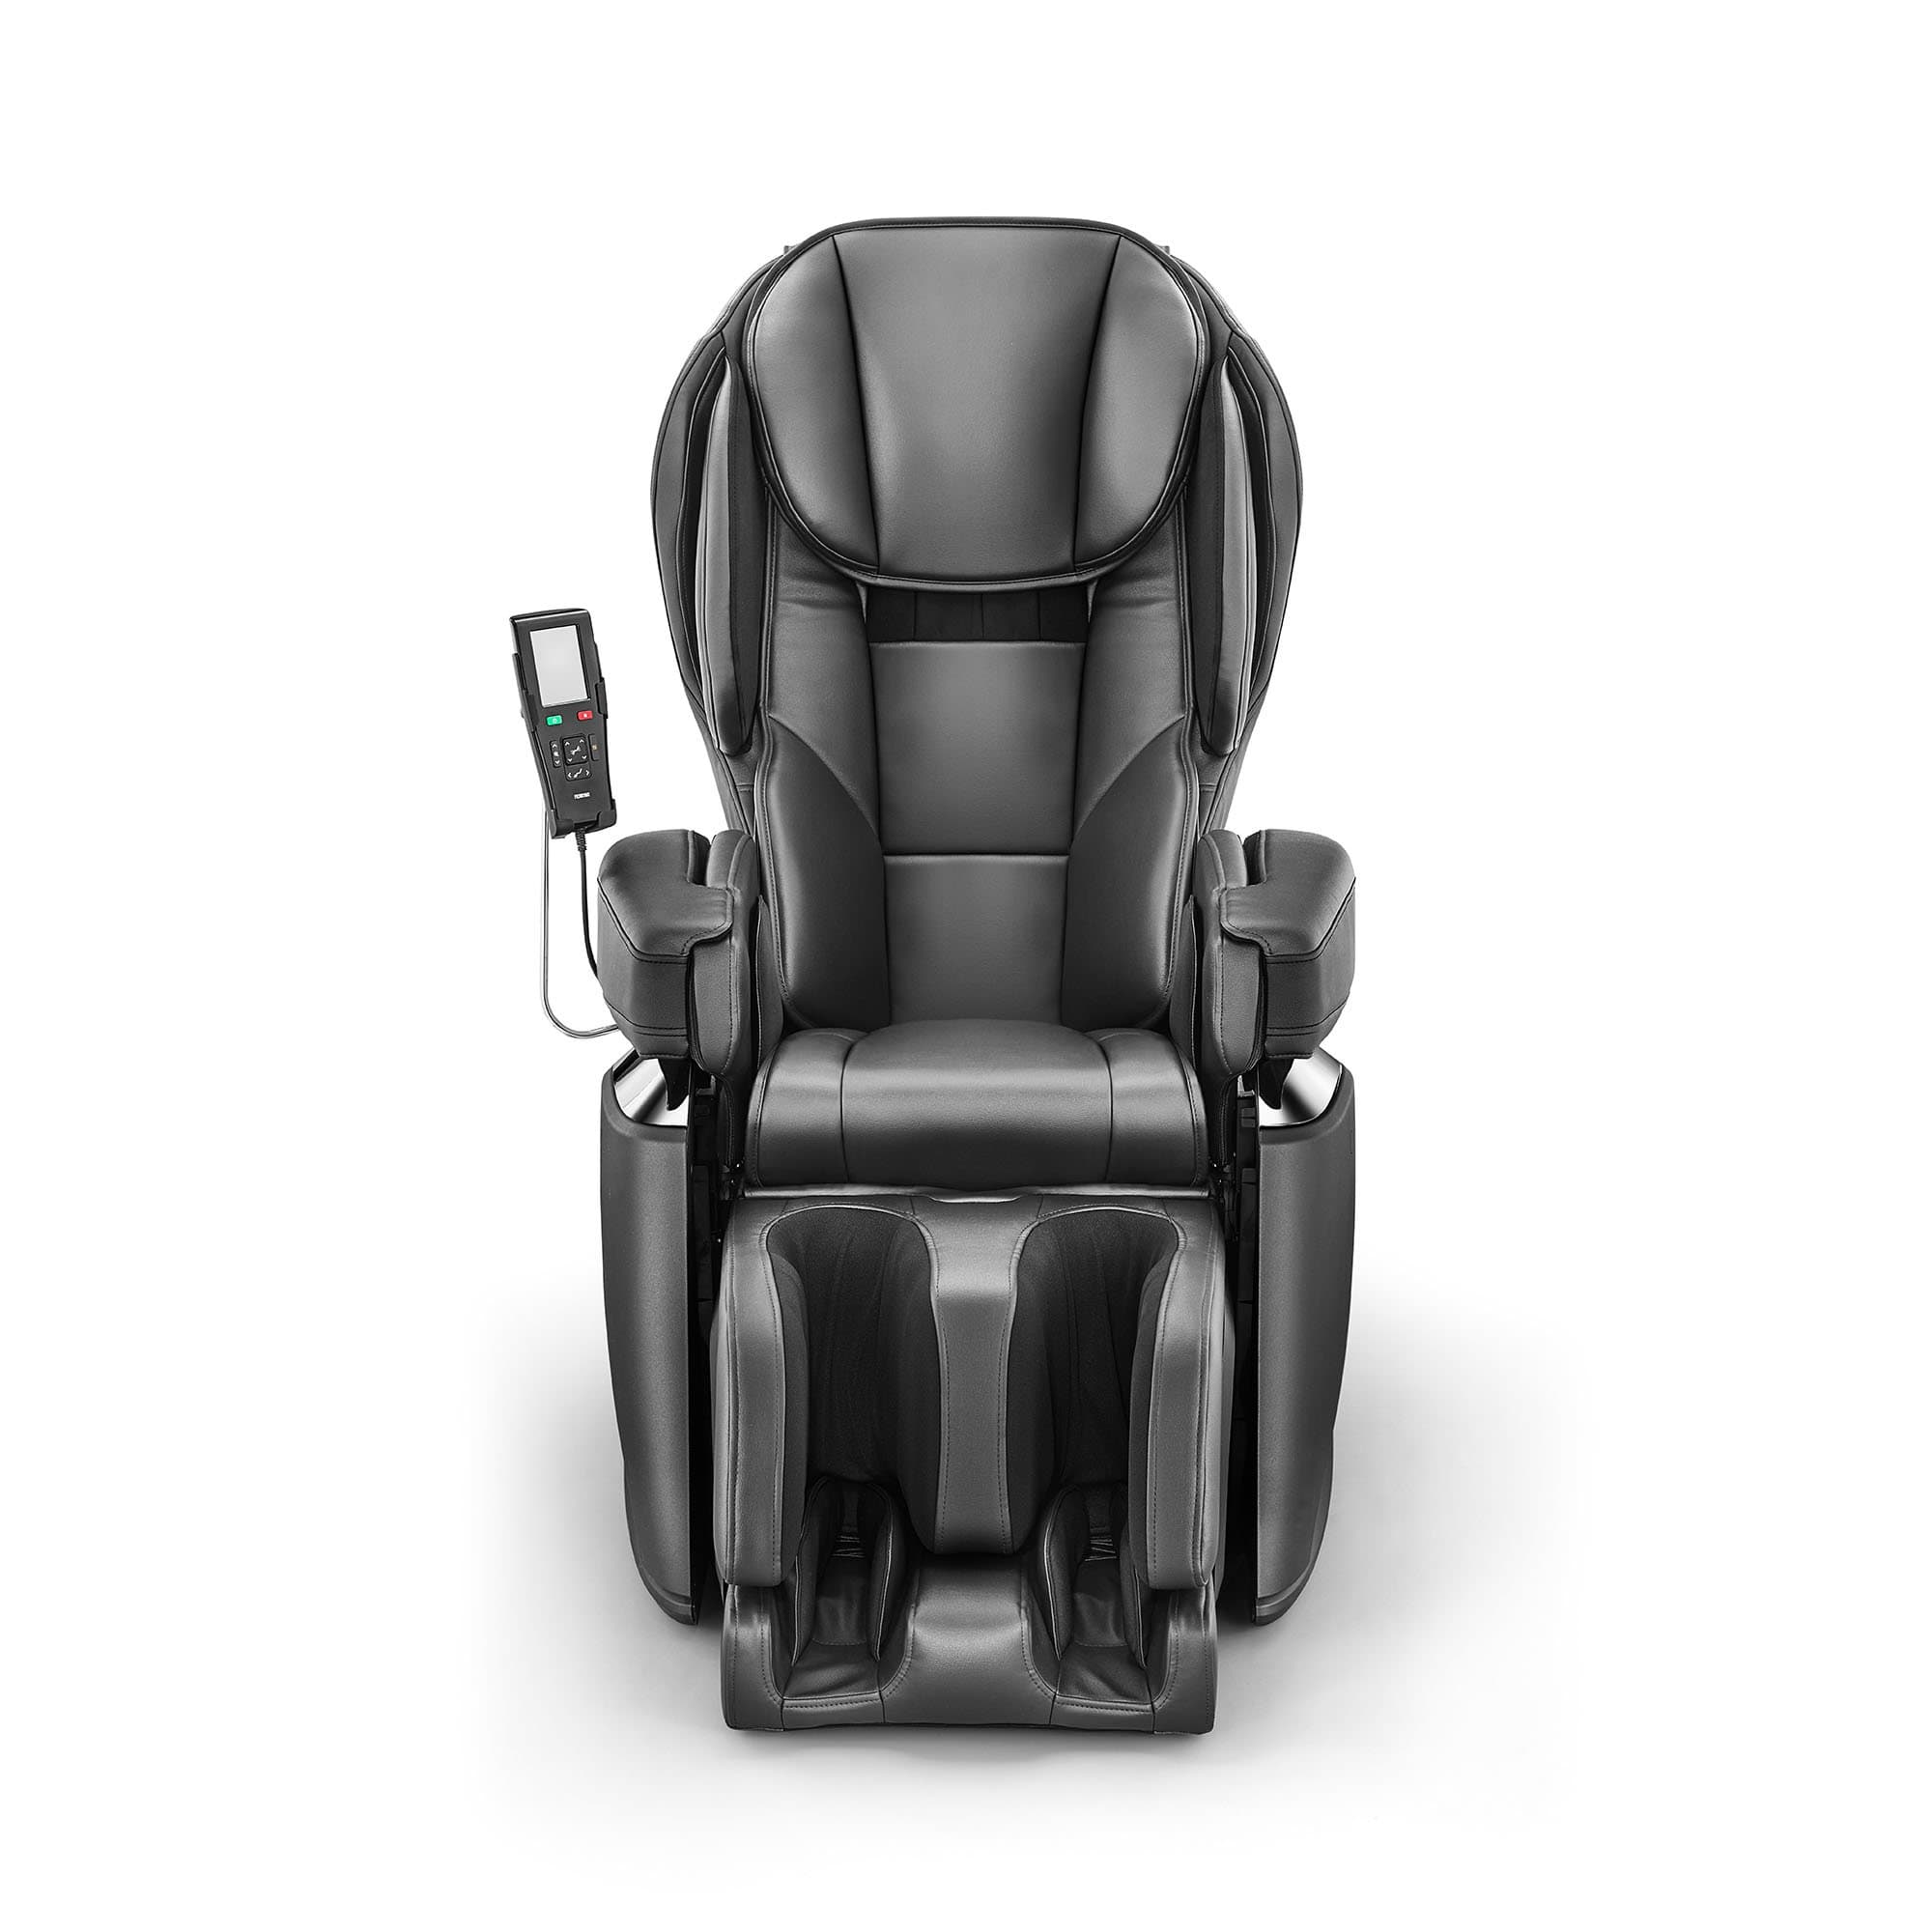 Synca Massage chair Synca  4D Ultra Premium Massage chair SMR0005-08NA